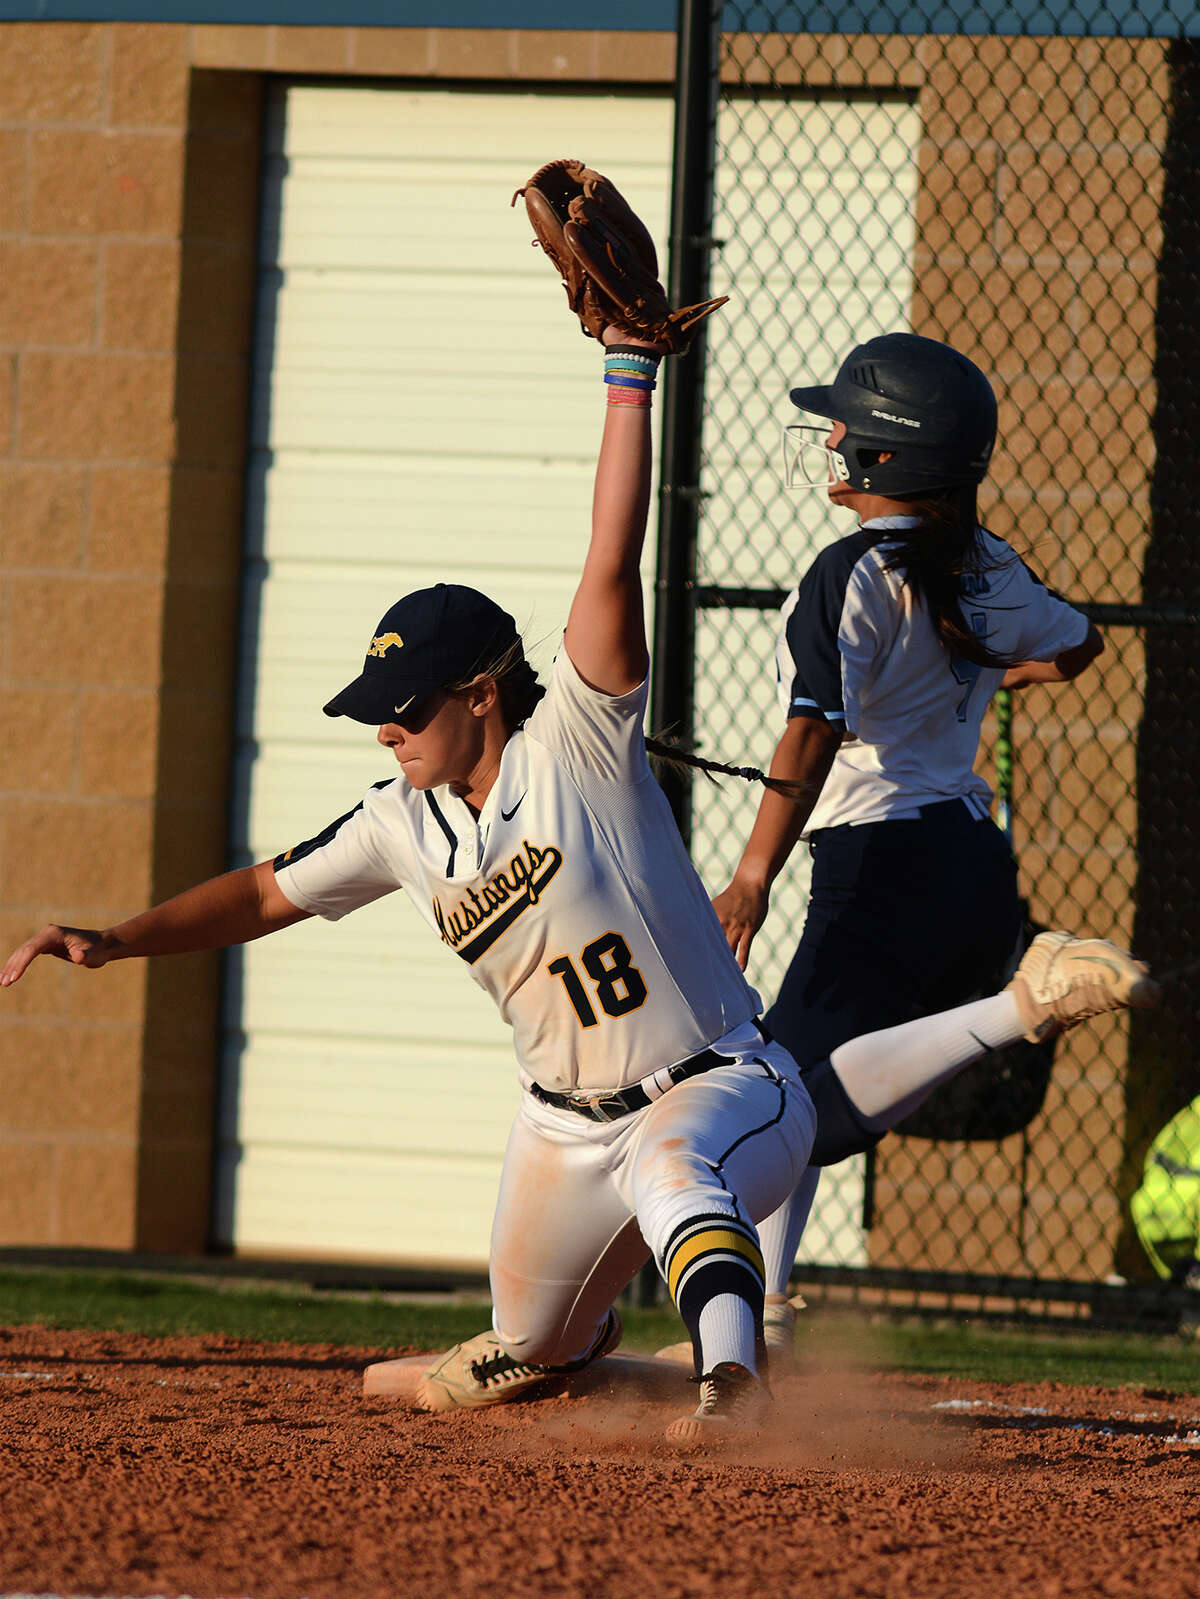 Cy Ranch junior first baseman Bryce West (18) stretches to finish a defensive play against Clements baserunner Tori Garza in the top of the 2nd inning of their Region III-6A Girls Area Round Softball Playoff matchup at Katy Taylor High School on Friday, May 5, 2017. (Photo by Jerry Baker/Freelance